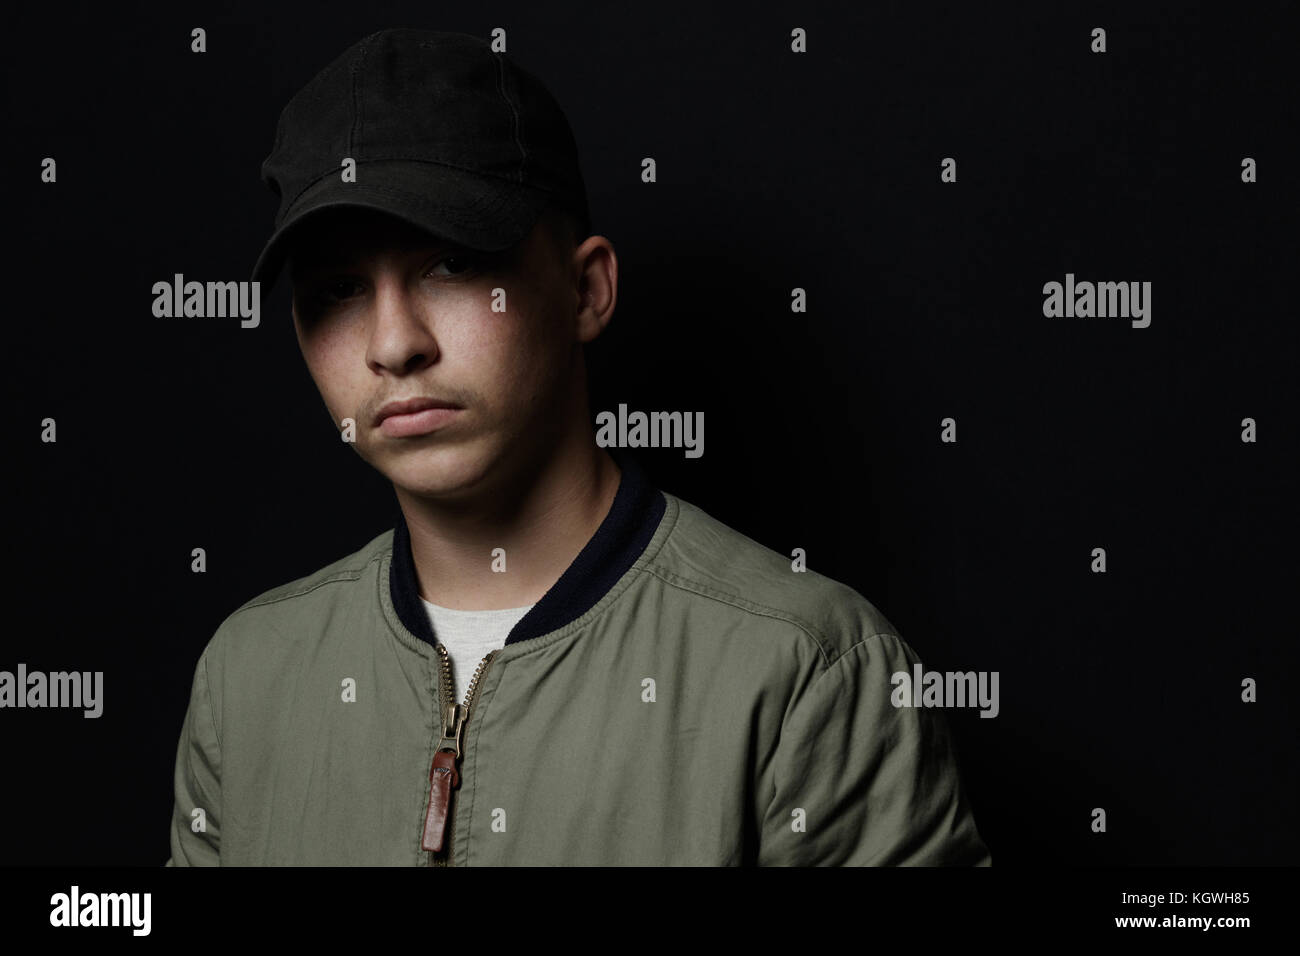 teen boy posing with black cap and bomber jacket in front of black background Stock Photo